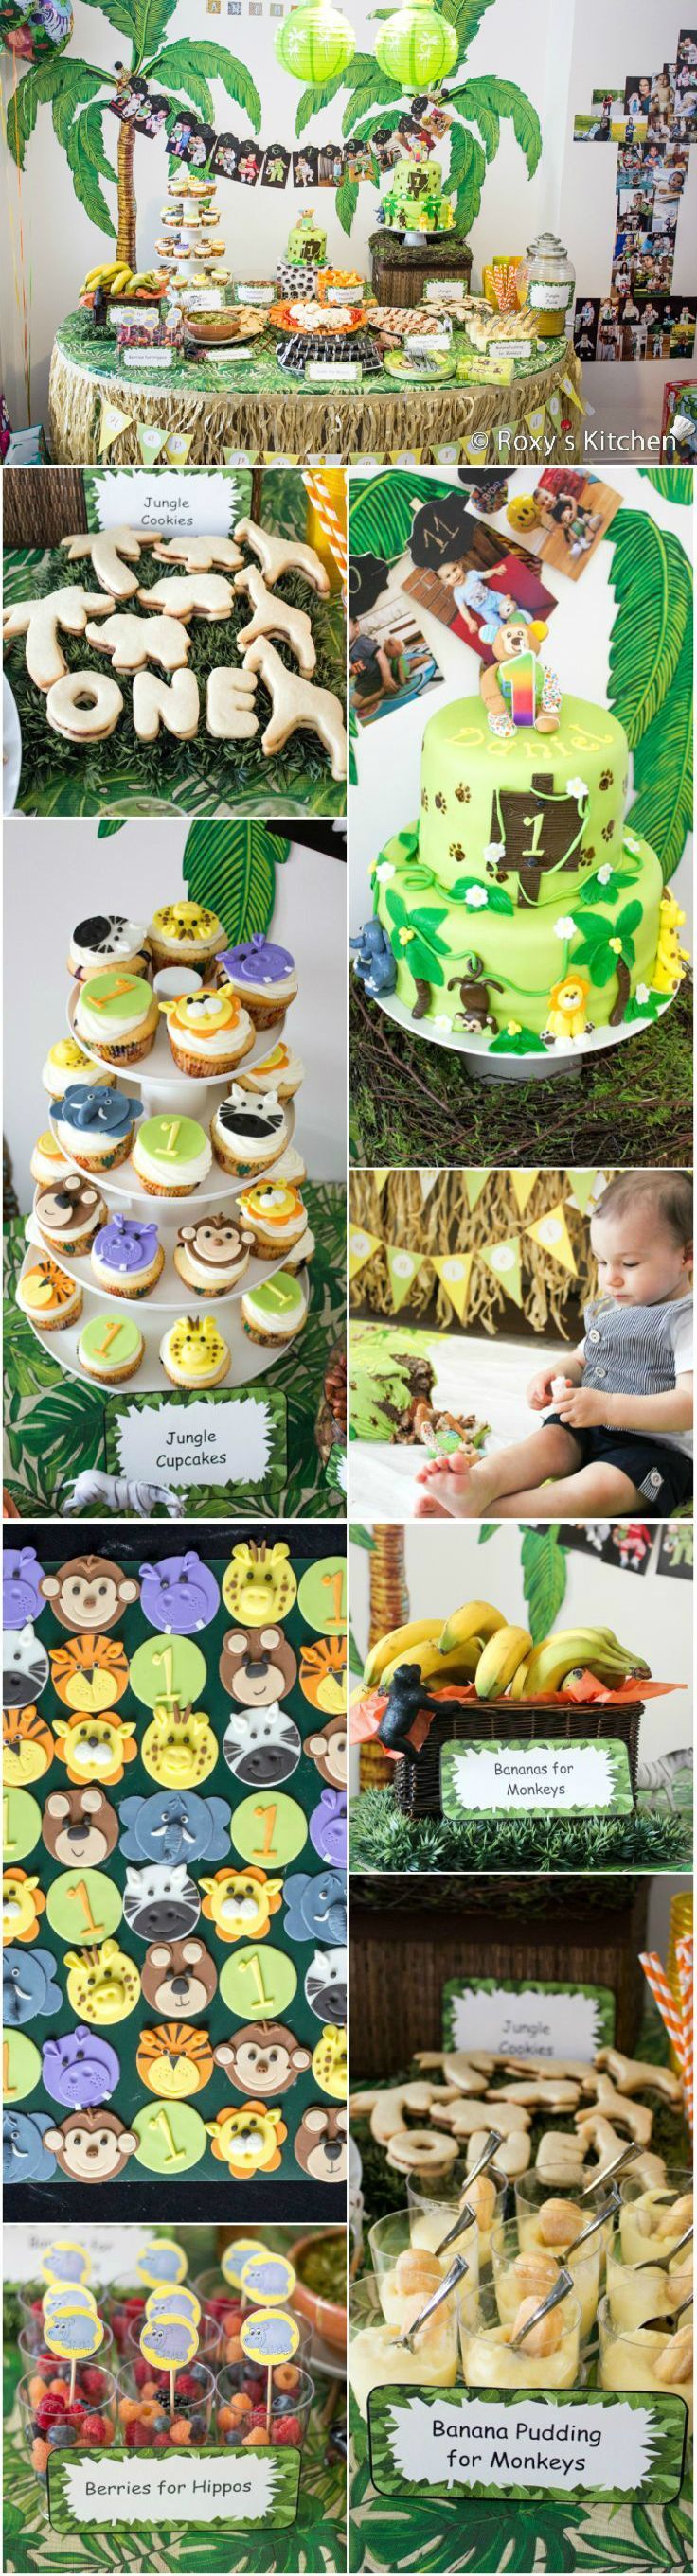 Safari / Jungle Themed First Birthday Party – Dessert Ideas. Great for a Baby Shower Too! Jungle Cake, Smash Cake, Jungle Animal